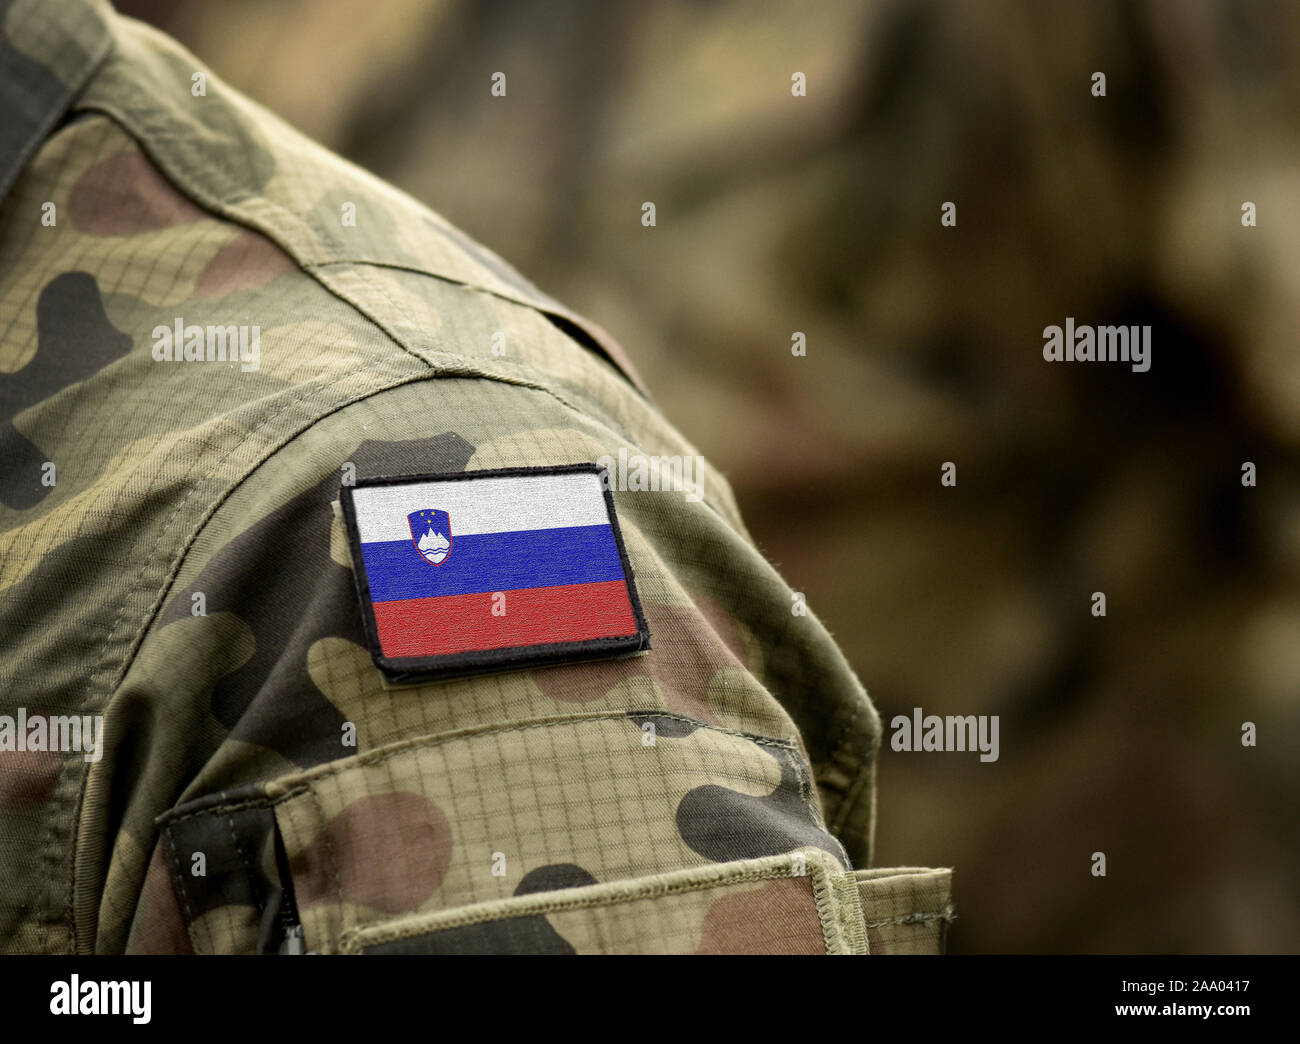 Flag of Slovenia  on military uniform. Army, armed forces, soldiers. Collage. Stock Photo